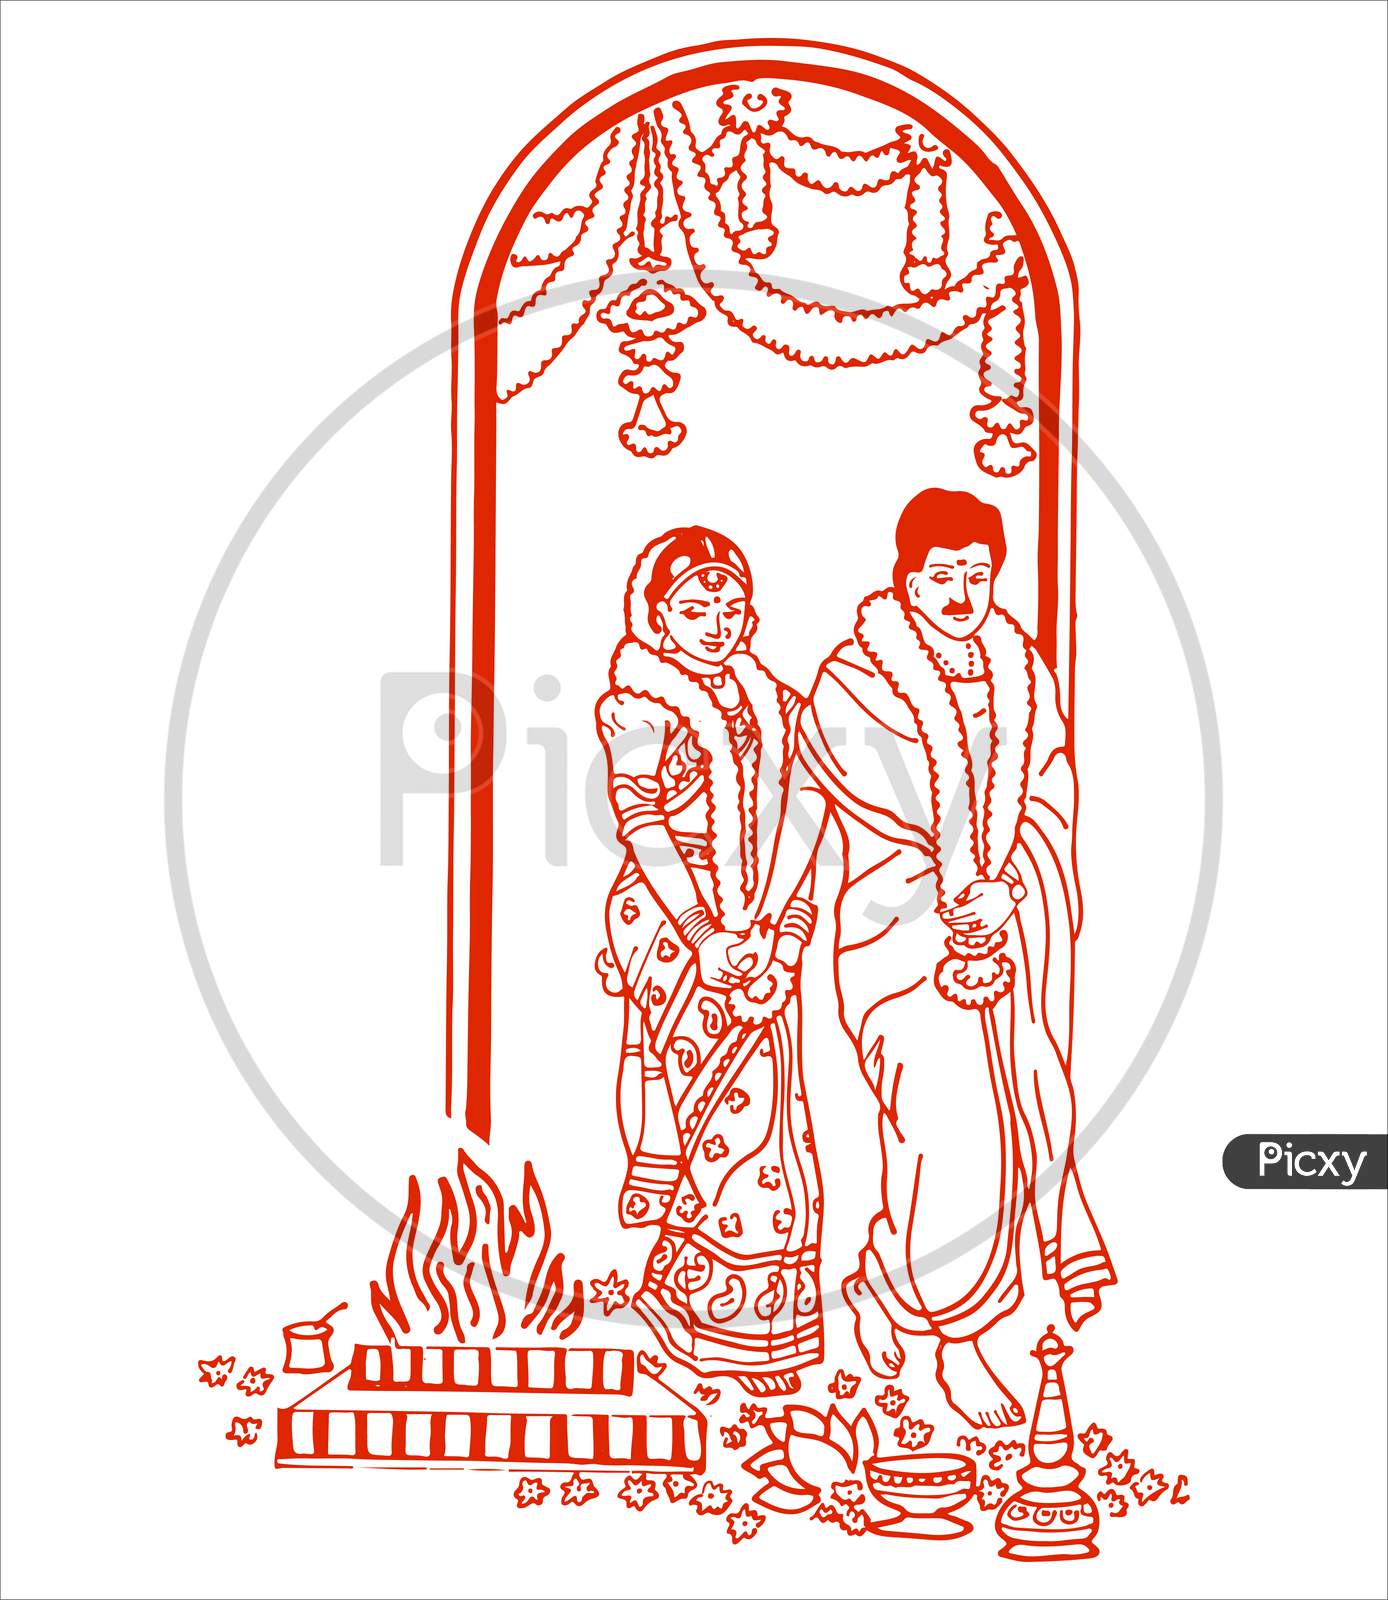 Indian wedding cartoon Images - Search Images on Everypixel